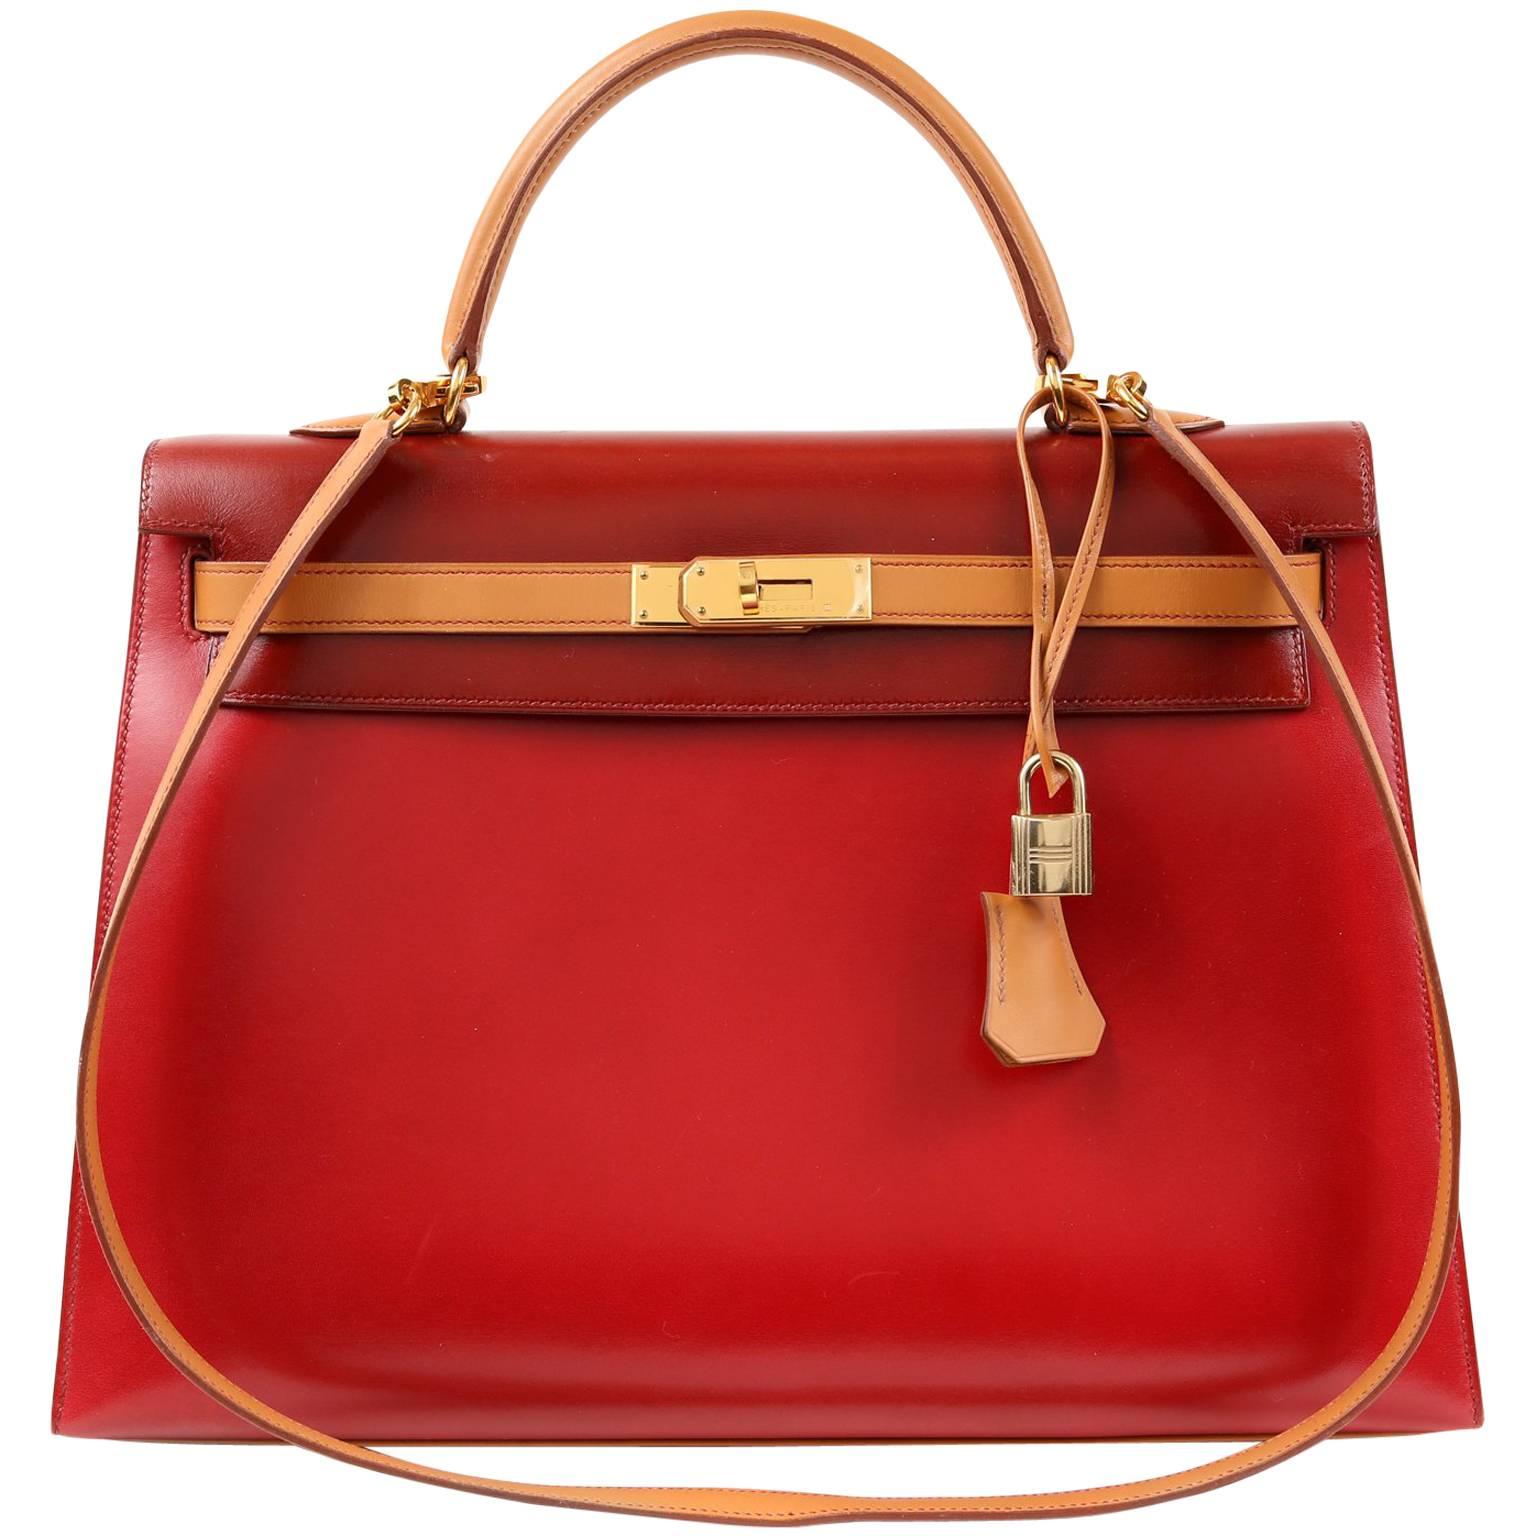 Hermès Tri Color Box Calf 35 cm Kelly Sellier- Red, Rouge H, Gold